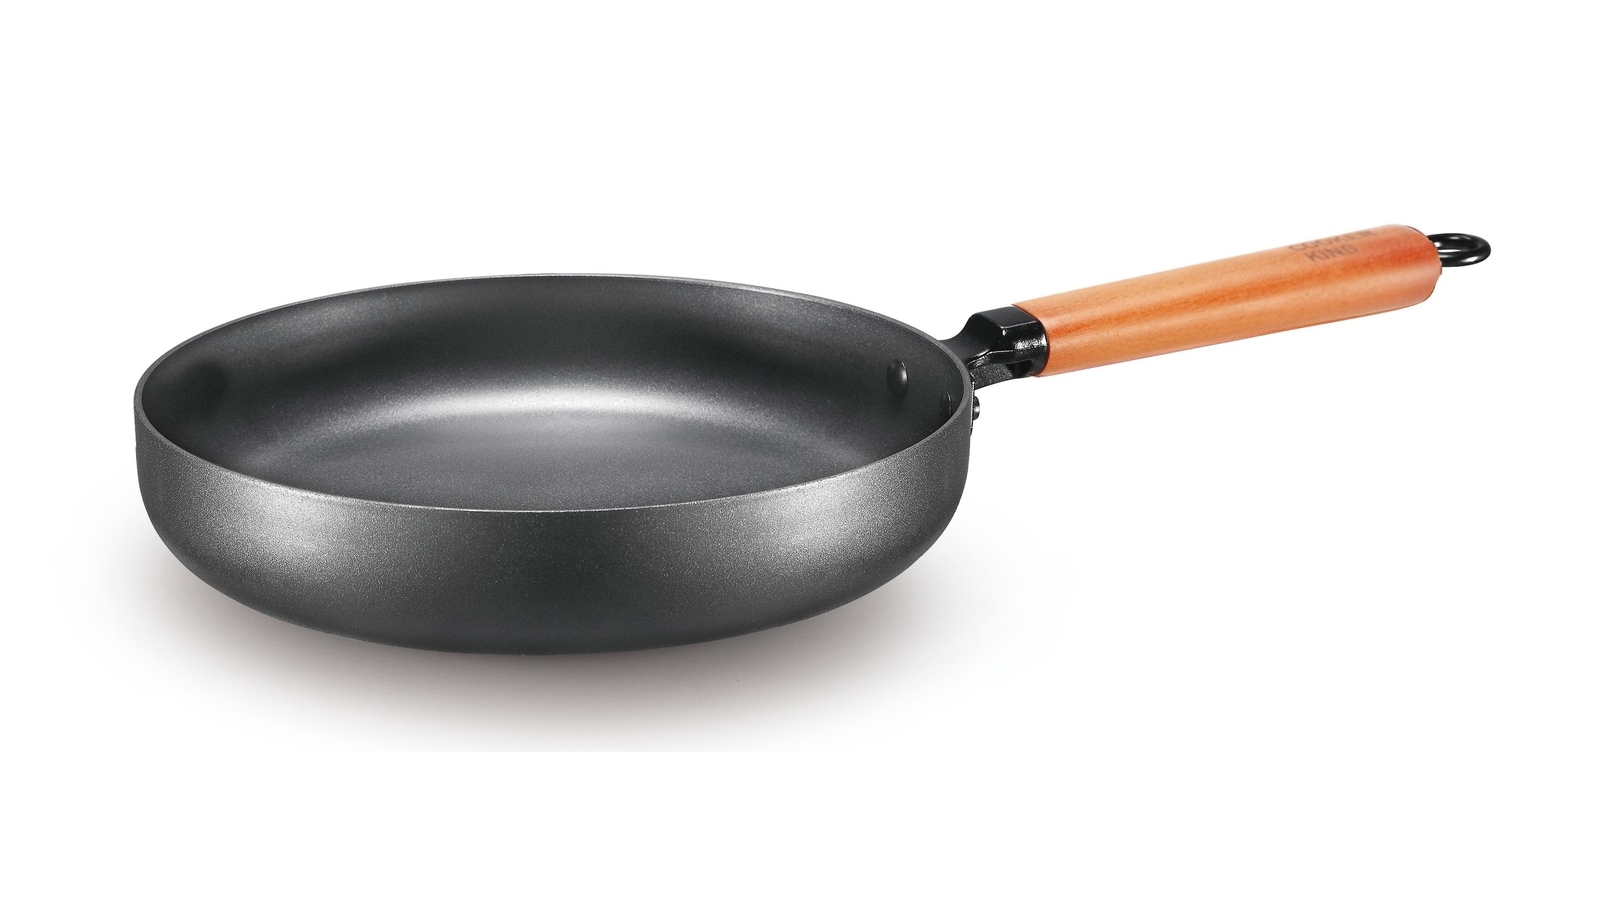 The Indus Valley Cast Iron Fish Fry Pan for Frying/Roasting with Double  Handle, 8.8 Inch, 1.5kg, Gas & Induction-Friendly